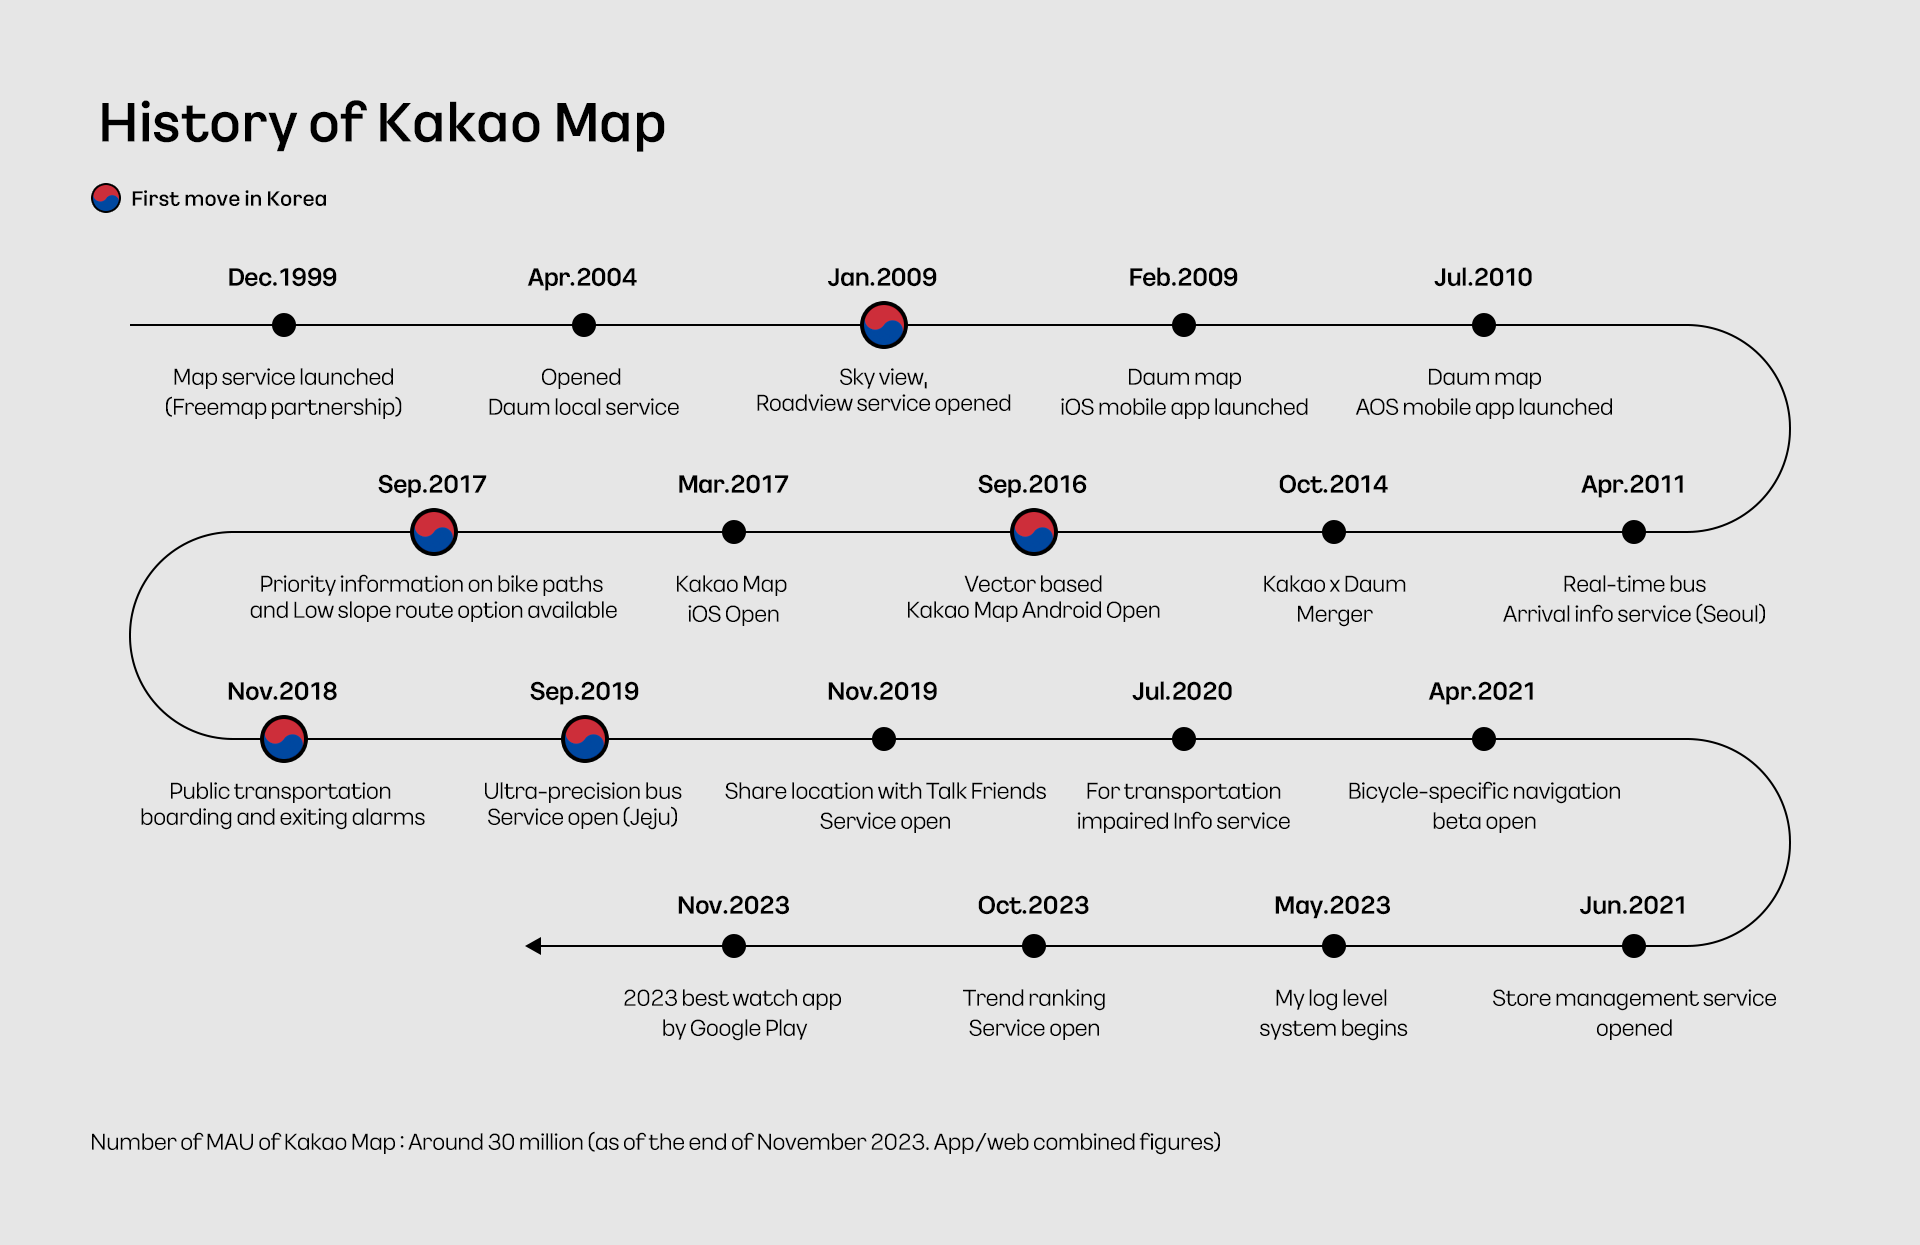 Kakao Map, which took its first steps in 1999, has grown into a comprehensive location-based platform encompassing the web and apps over the past 24 years.